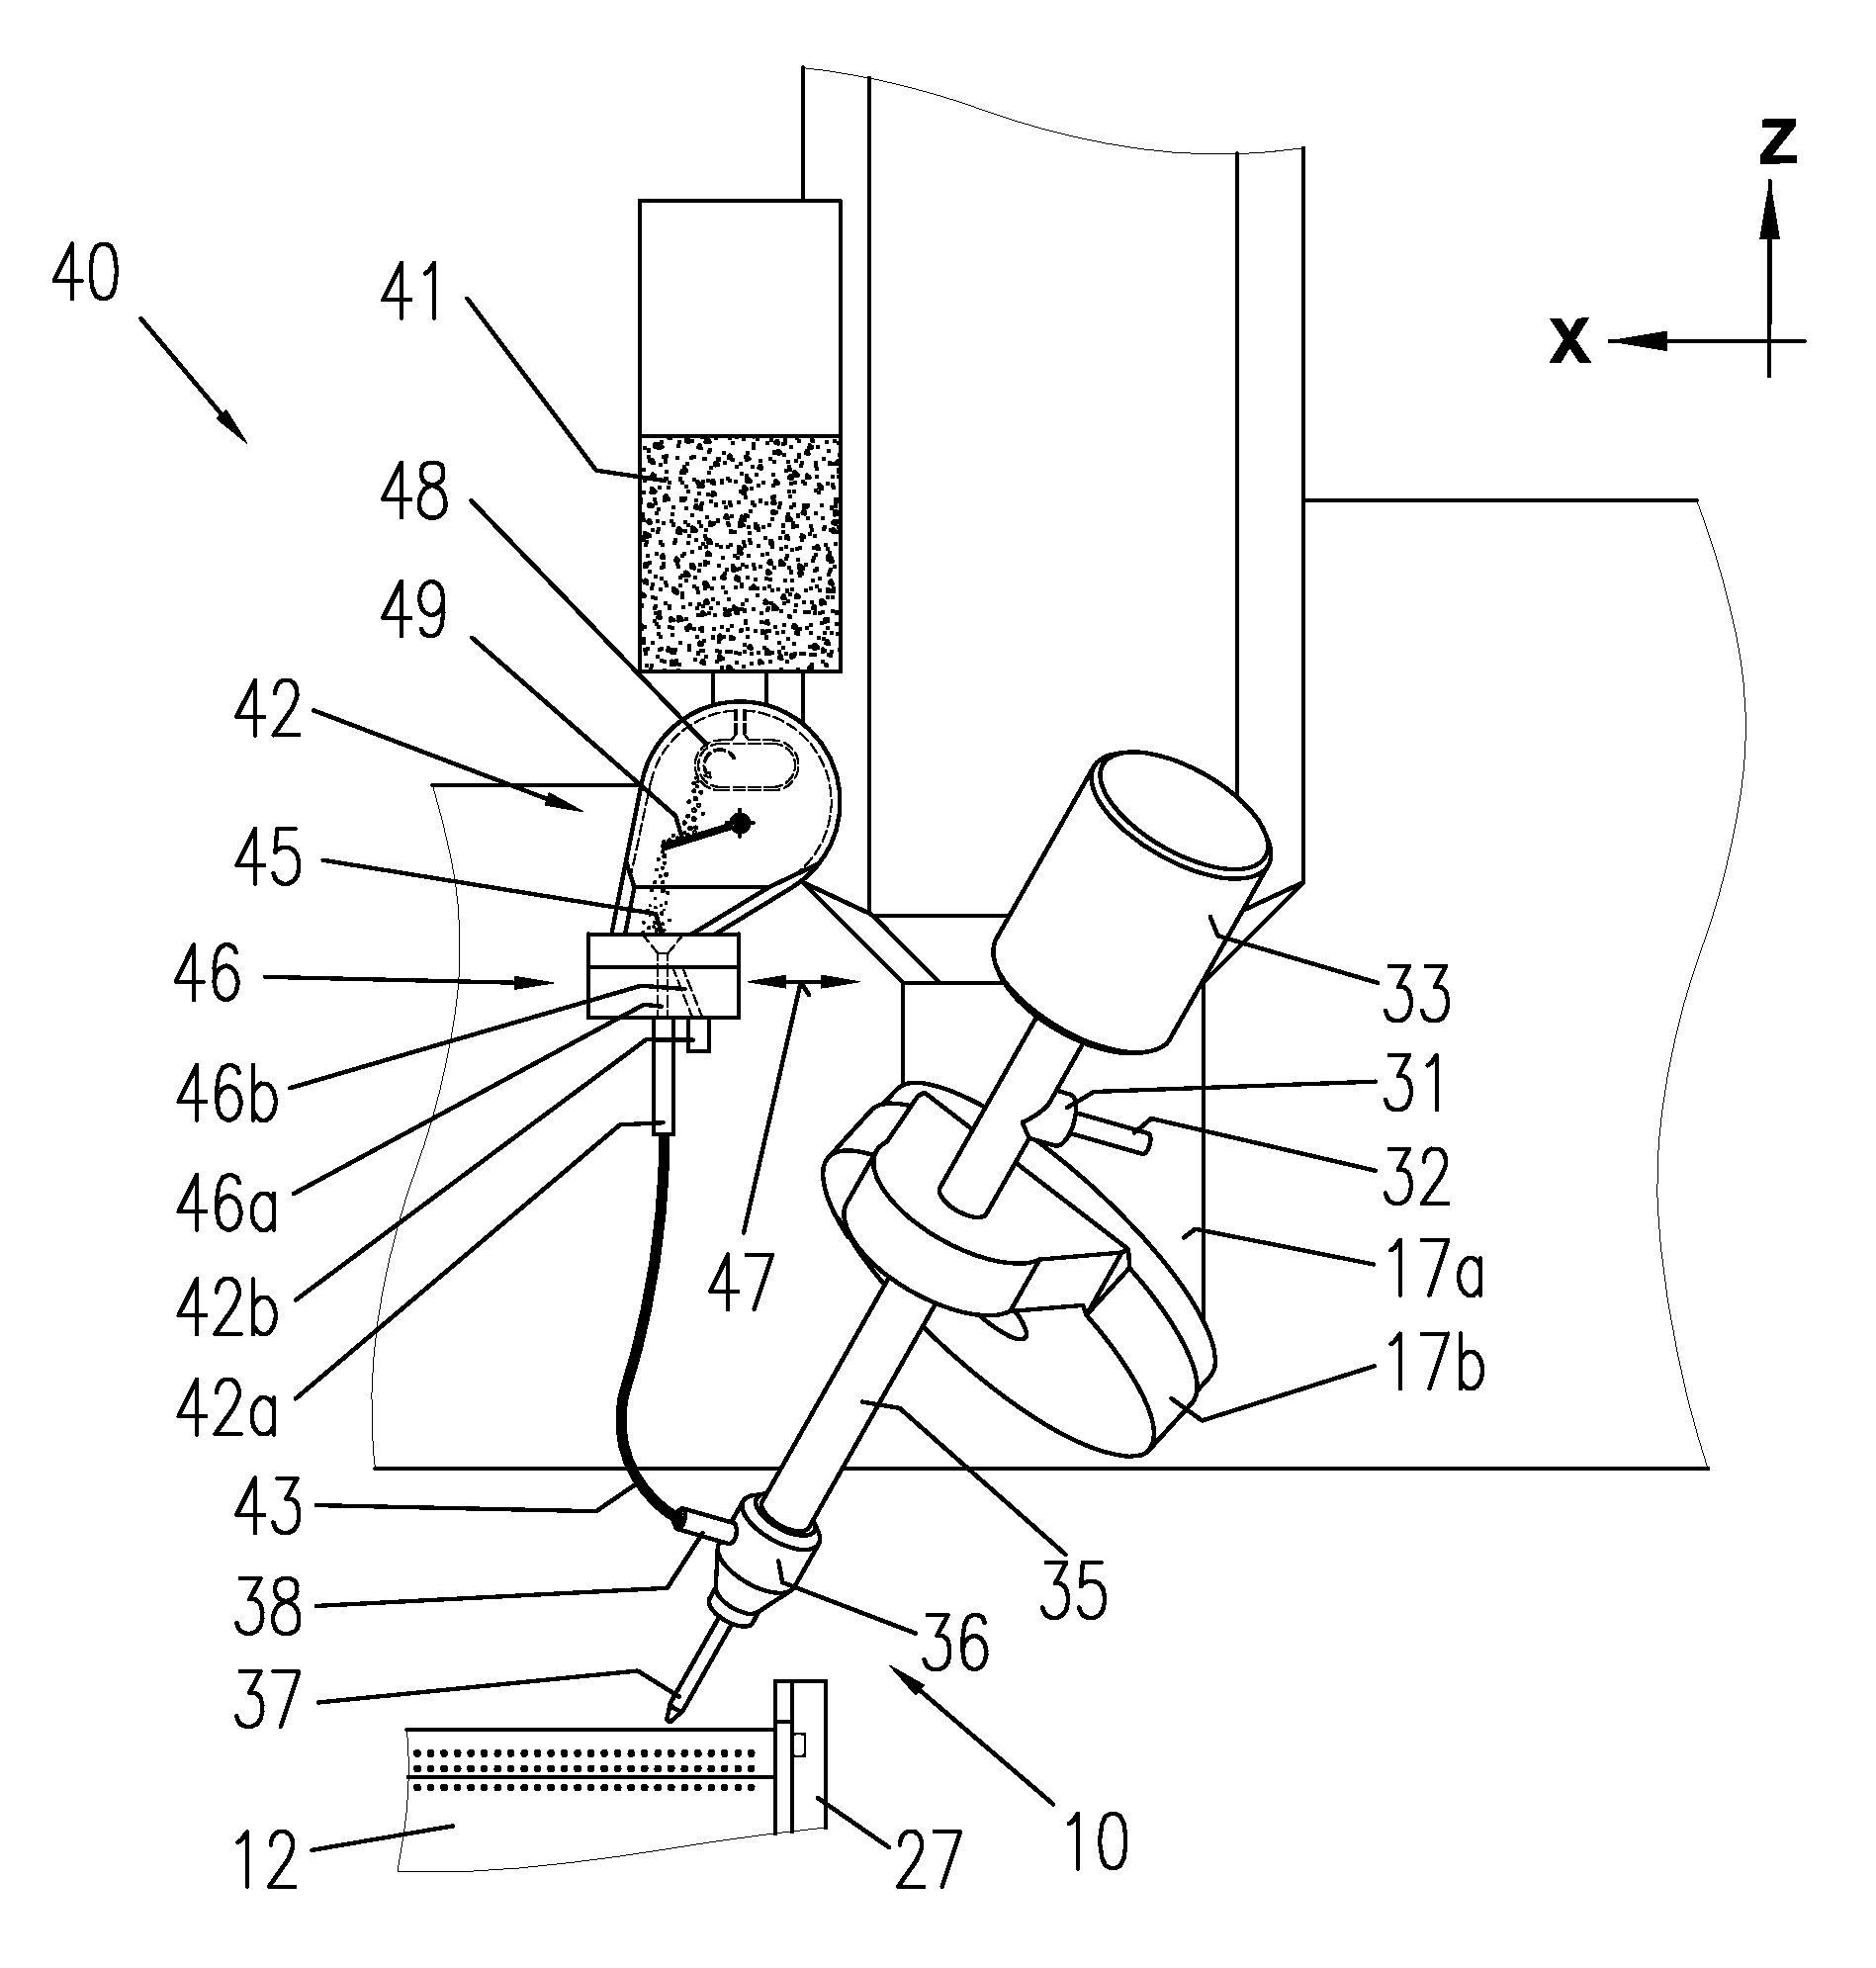 Method for drilling at least one hole into a workpiece